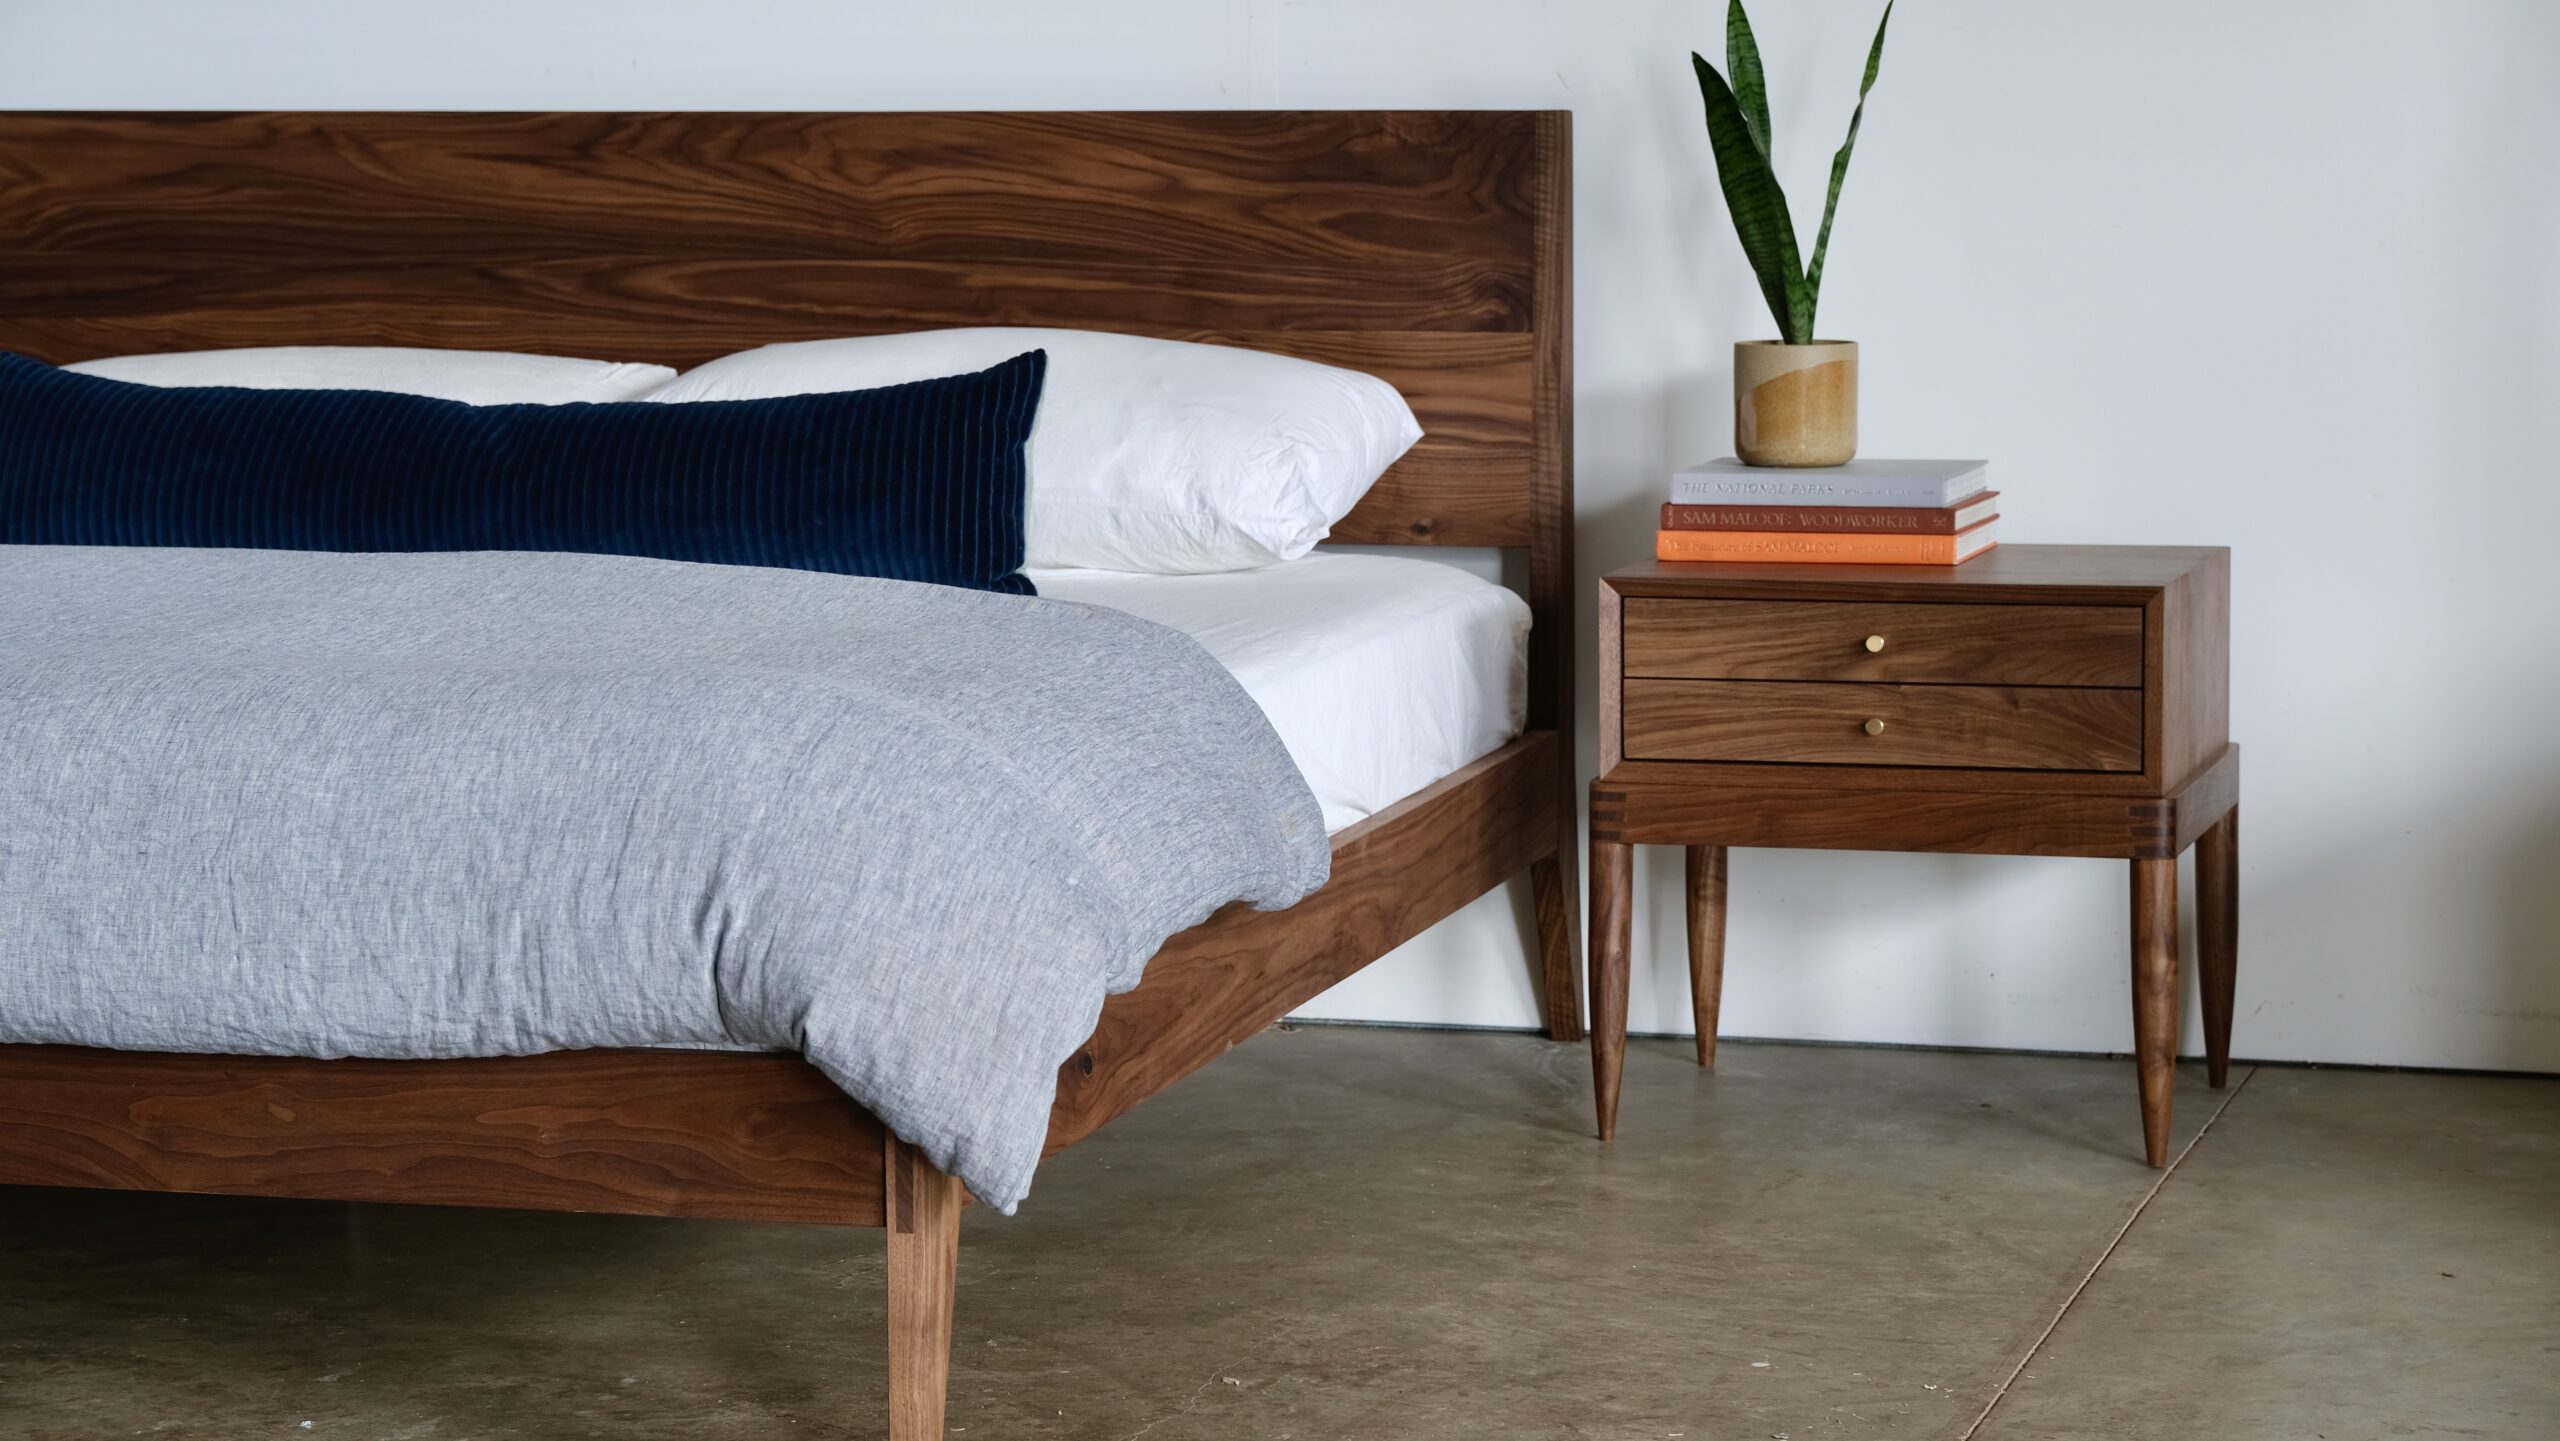 A walnut bed next to a solid walnut nightstand with books and a plant on top.